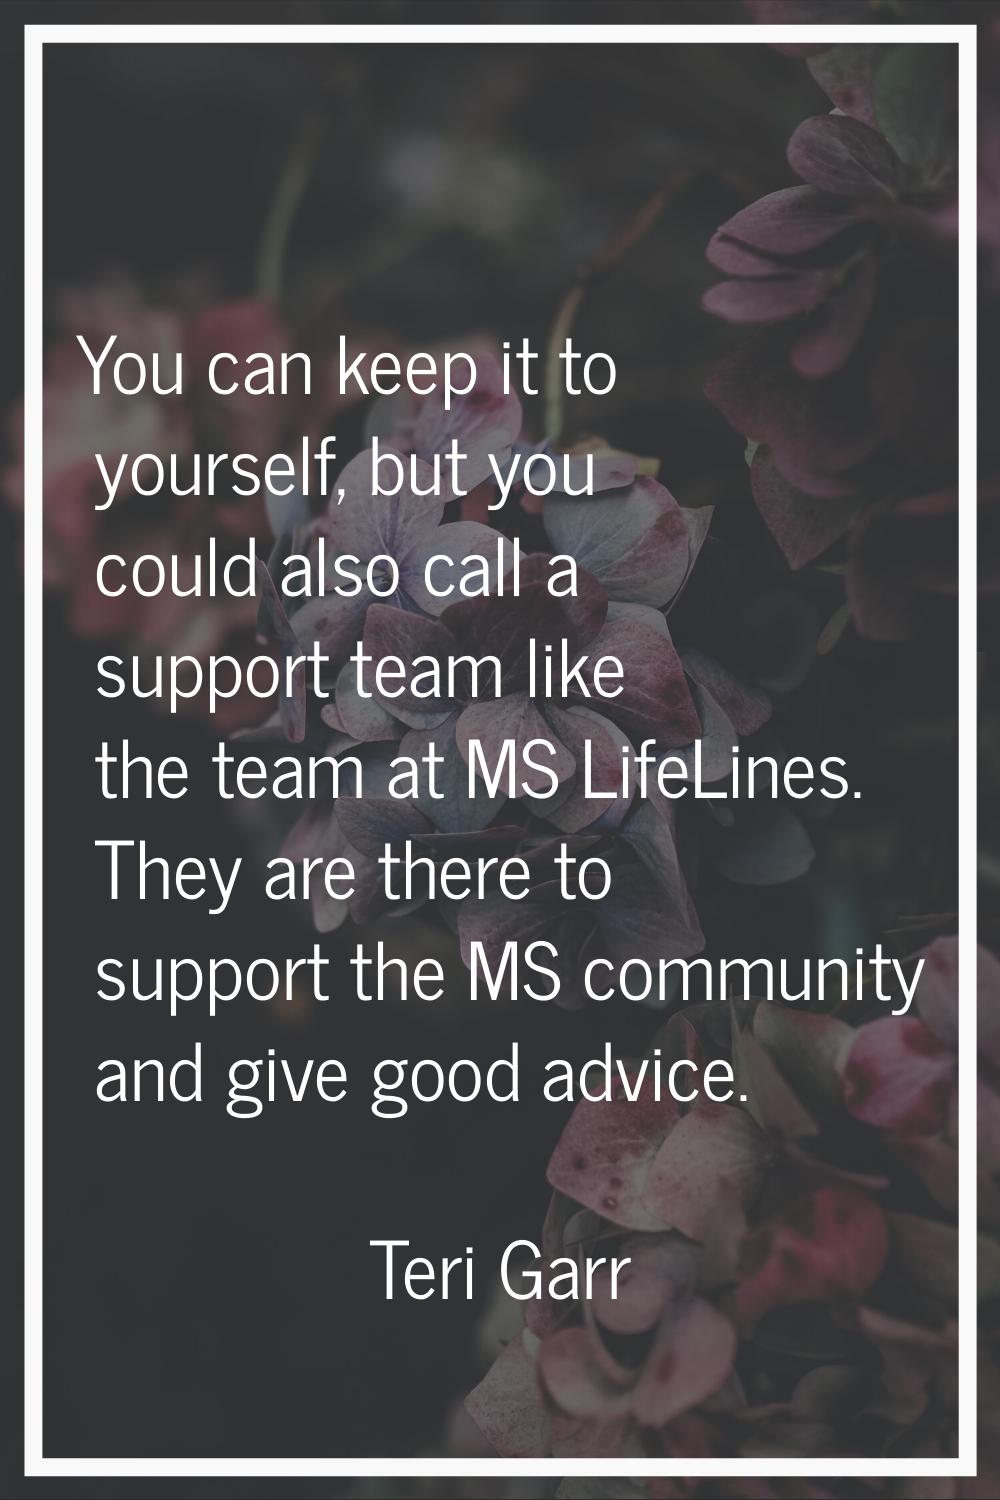 You can keep it to yourself, but you could also call a support team like the team at MS LifeLines. 